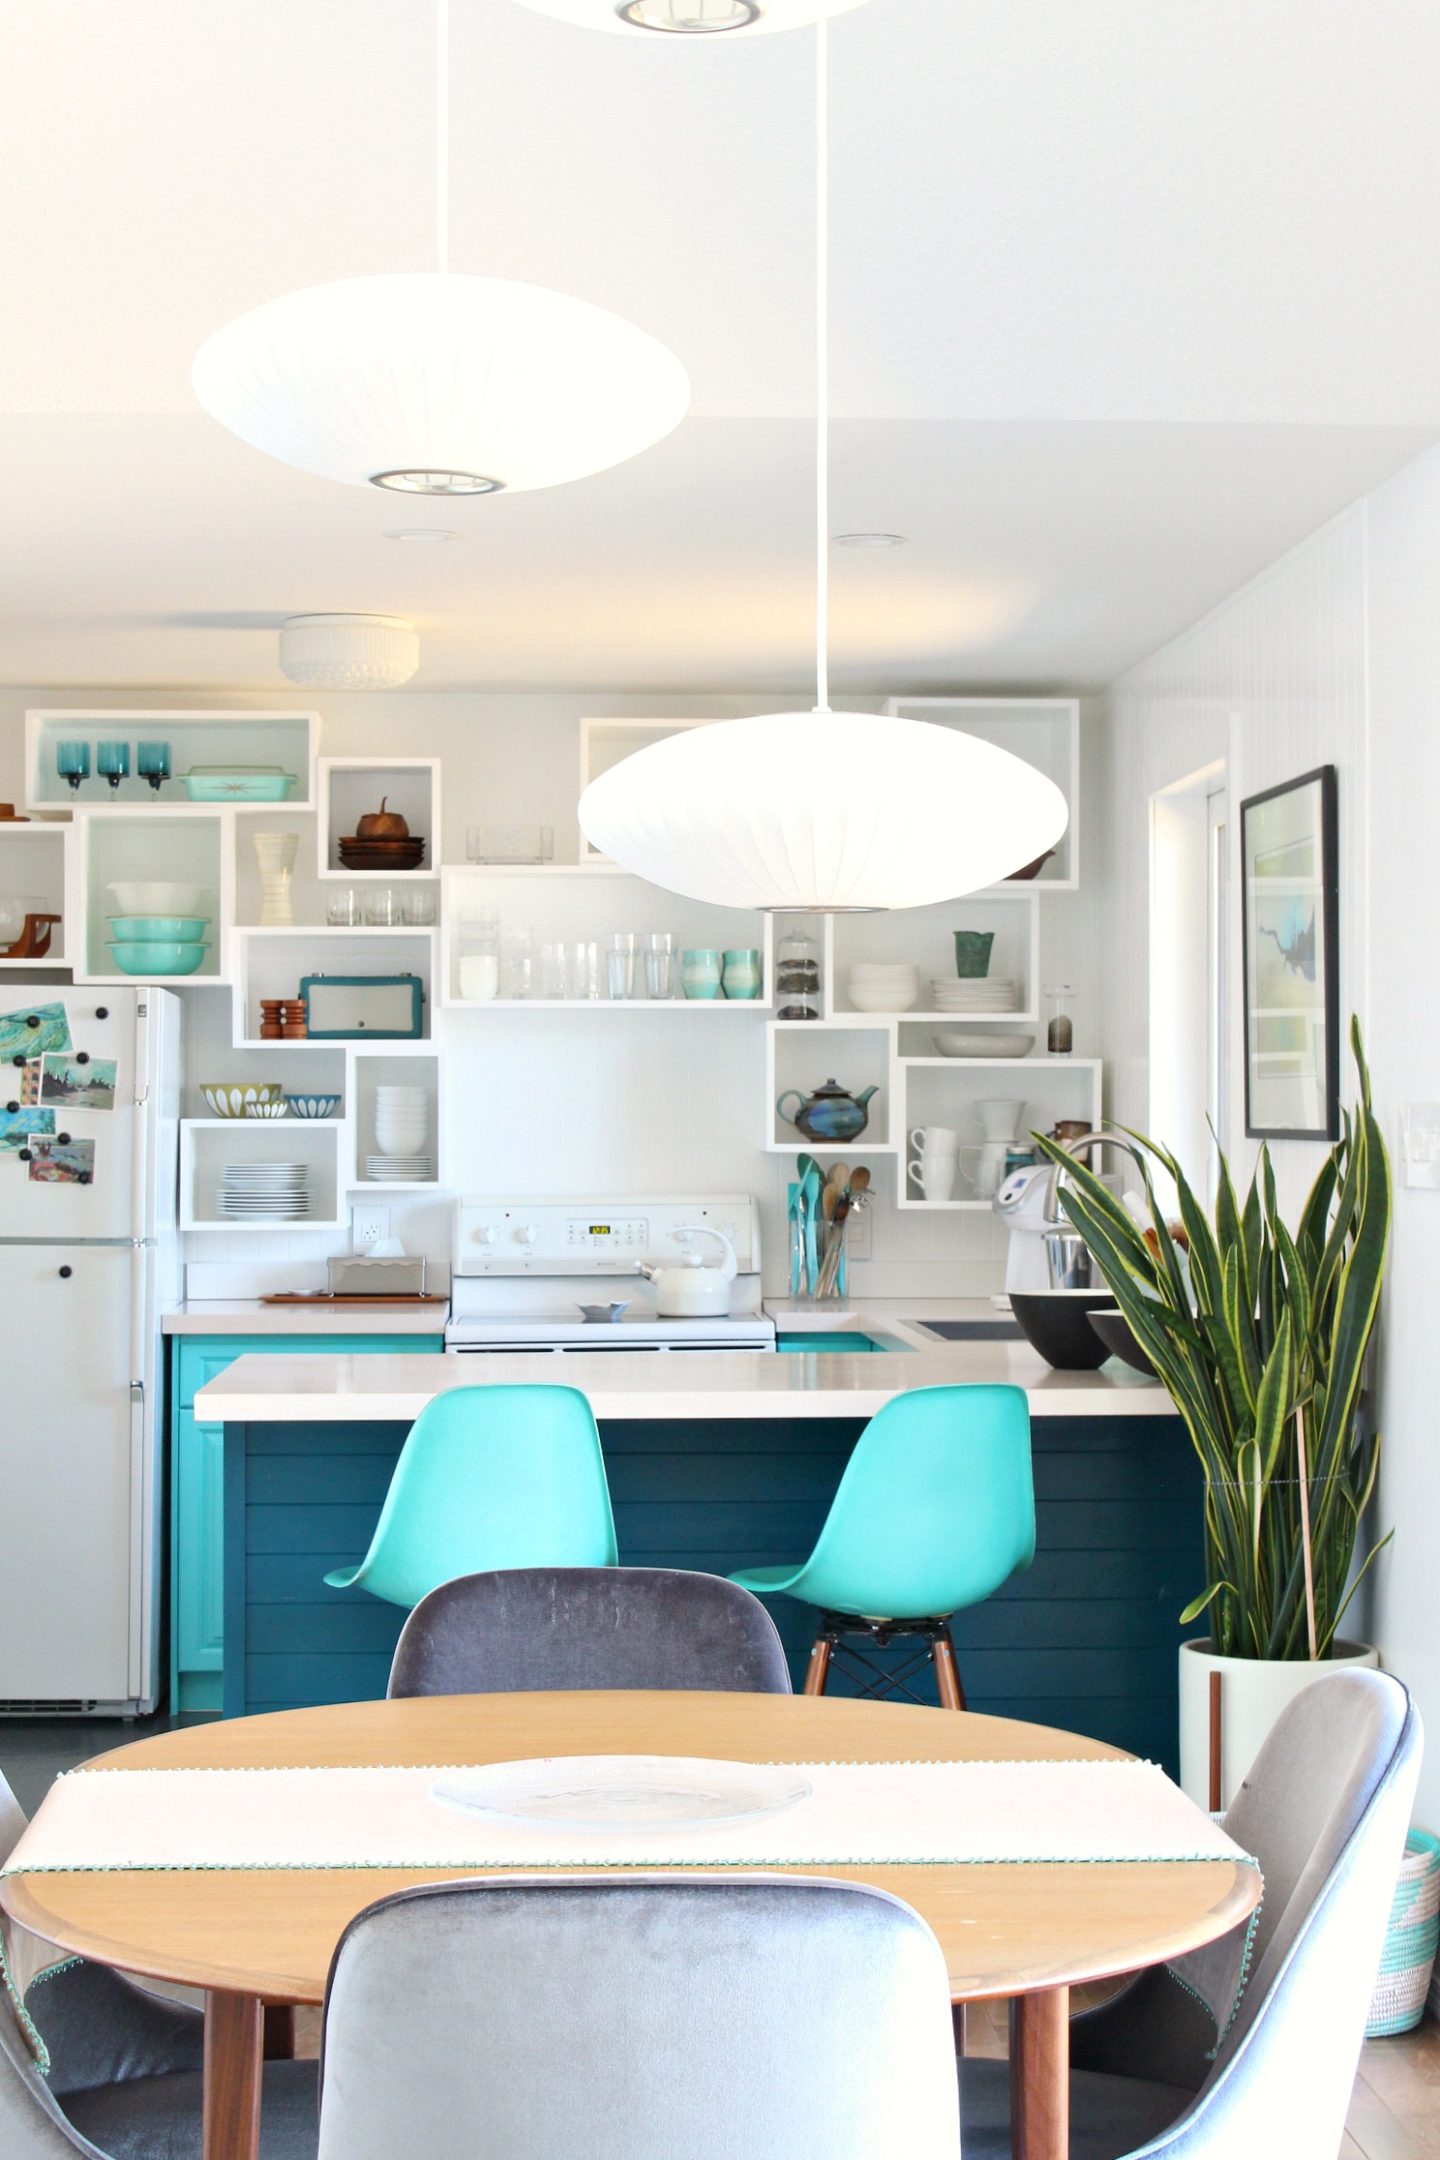 Lake House Kitchen with DIY Wall Cubbies Instead of Open Shelving - a Modern Take on Open Shelving in Kitchens. #openshelving #teal #colorfulhomedecor